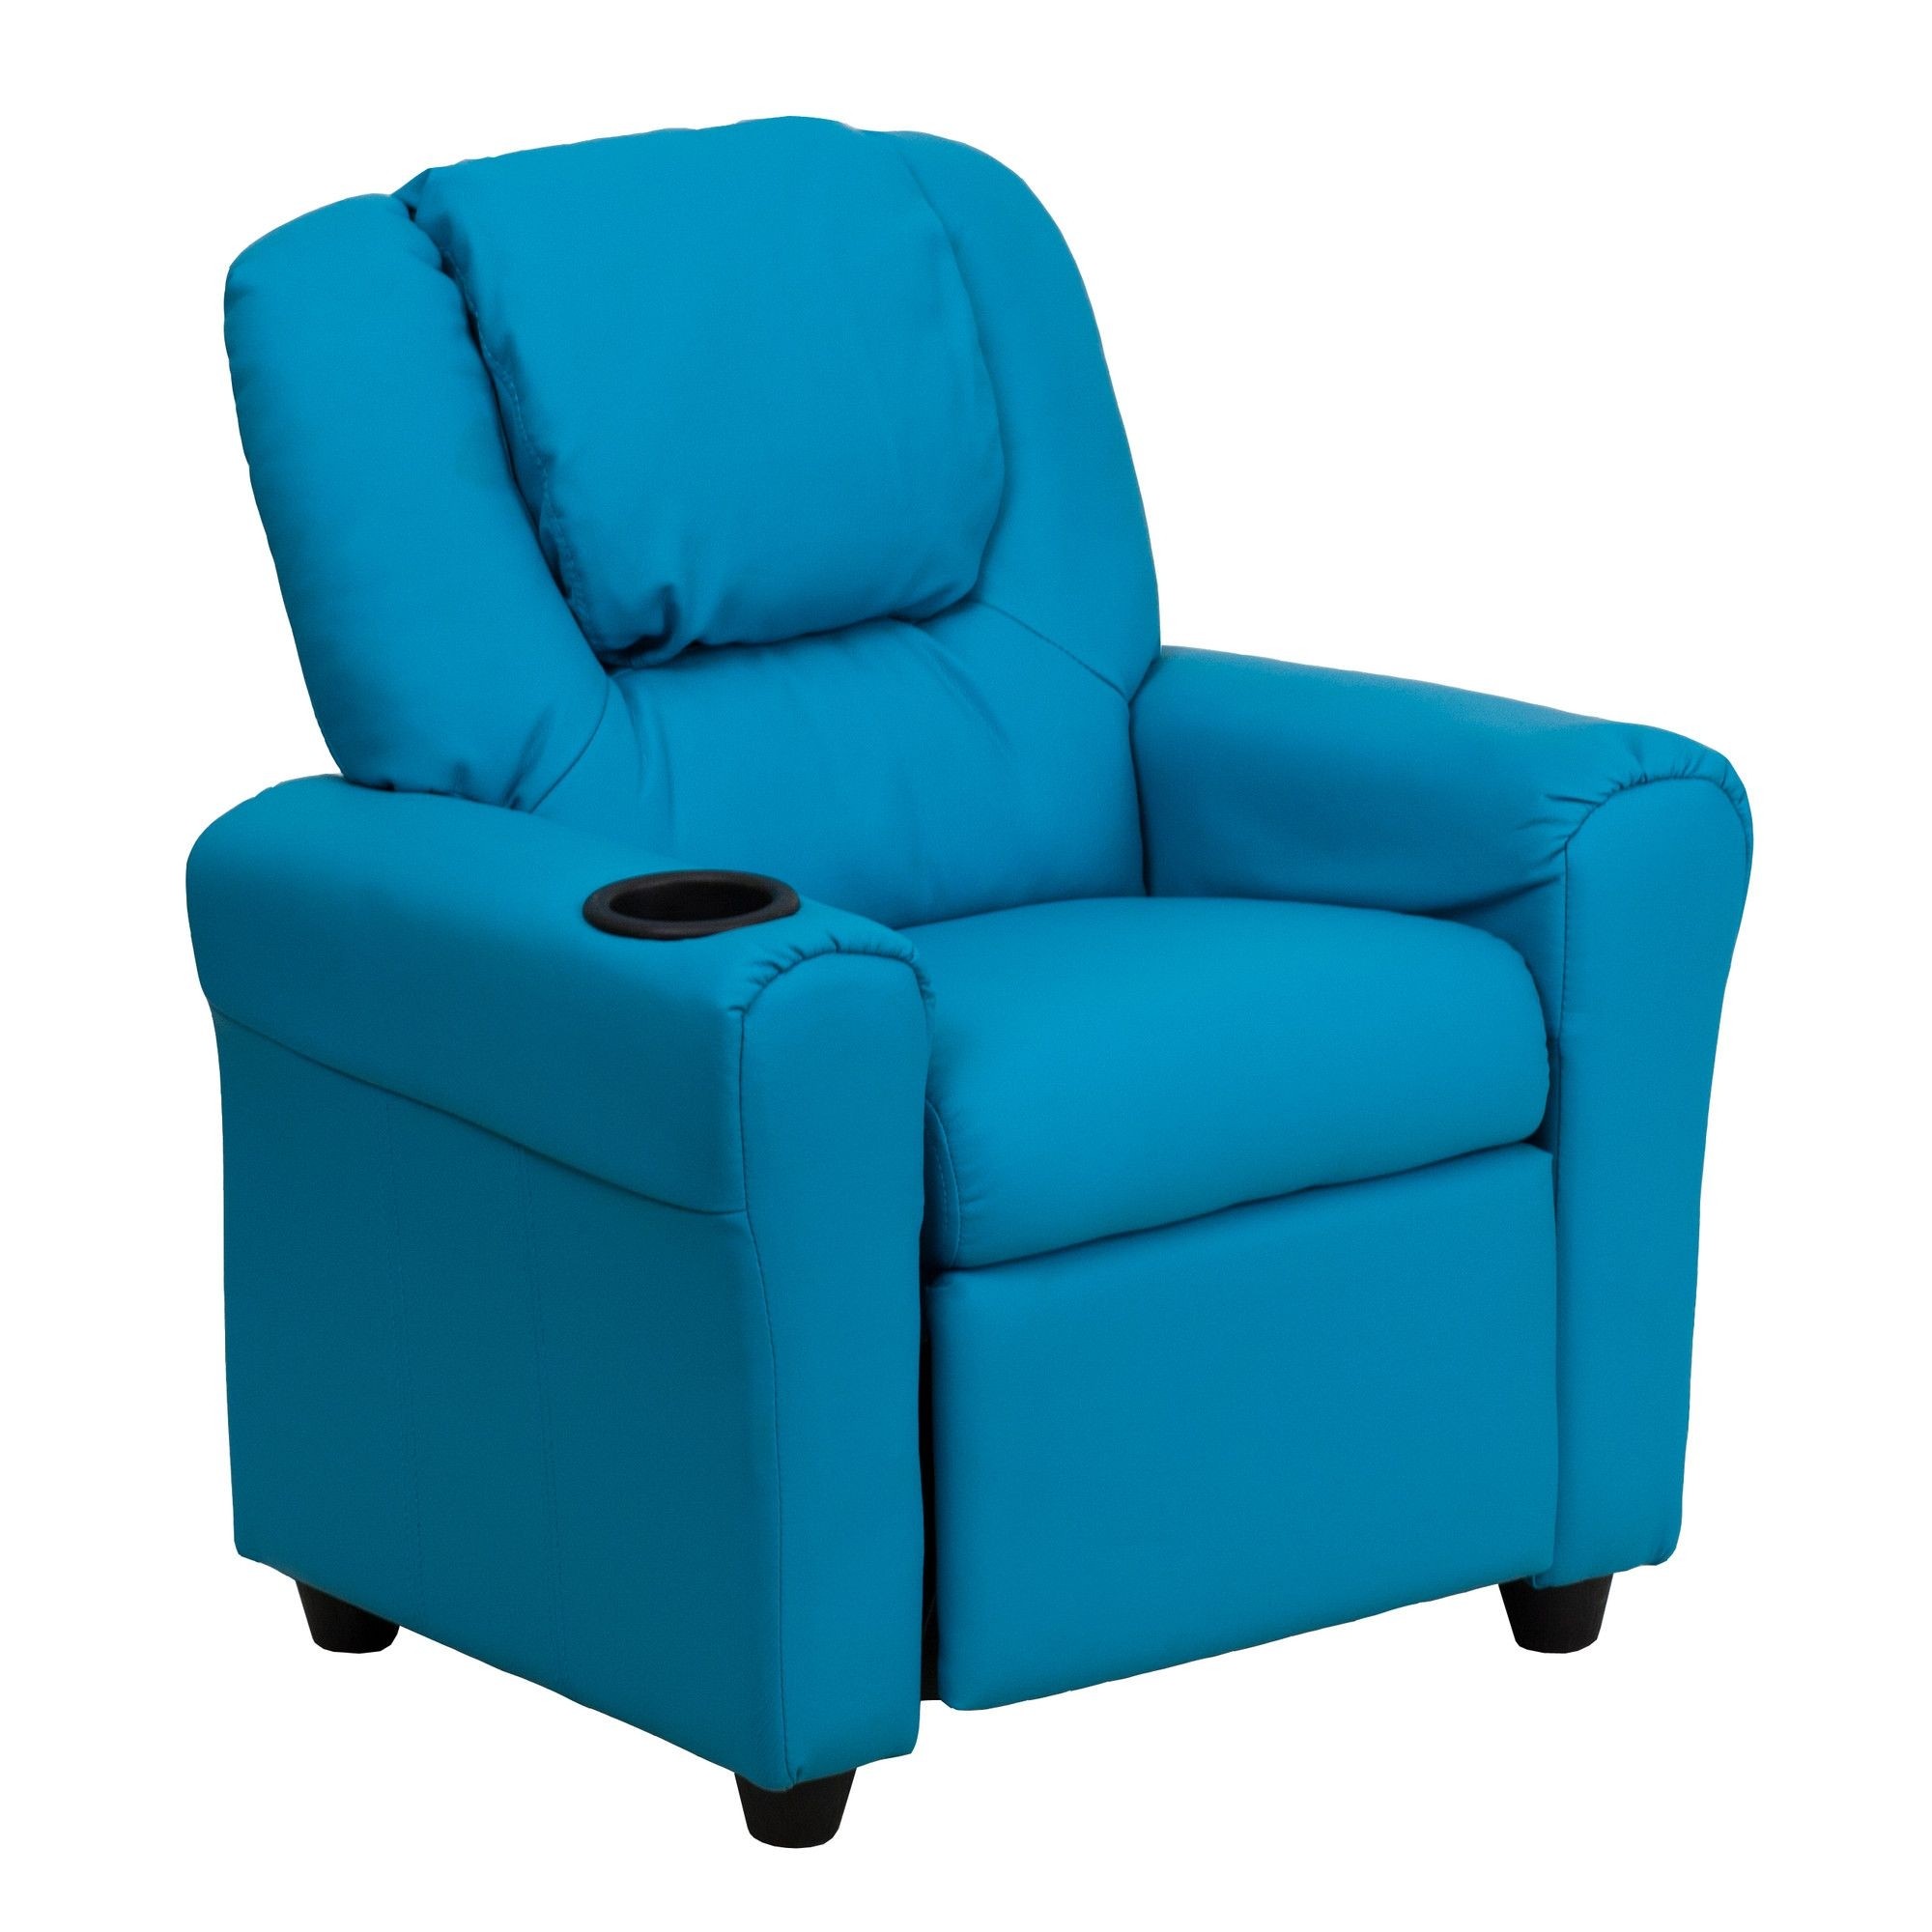 Flash Furniture DG-ULT-KID-TURQ-GG Contemporary Turquoise Vinyl Kids Recliner with Cup Holder and Headrest, Green